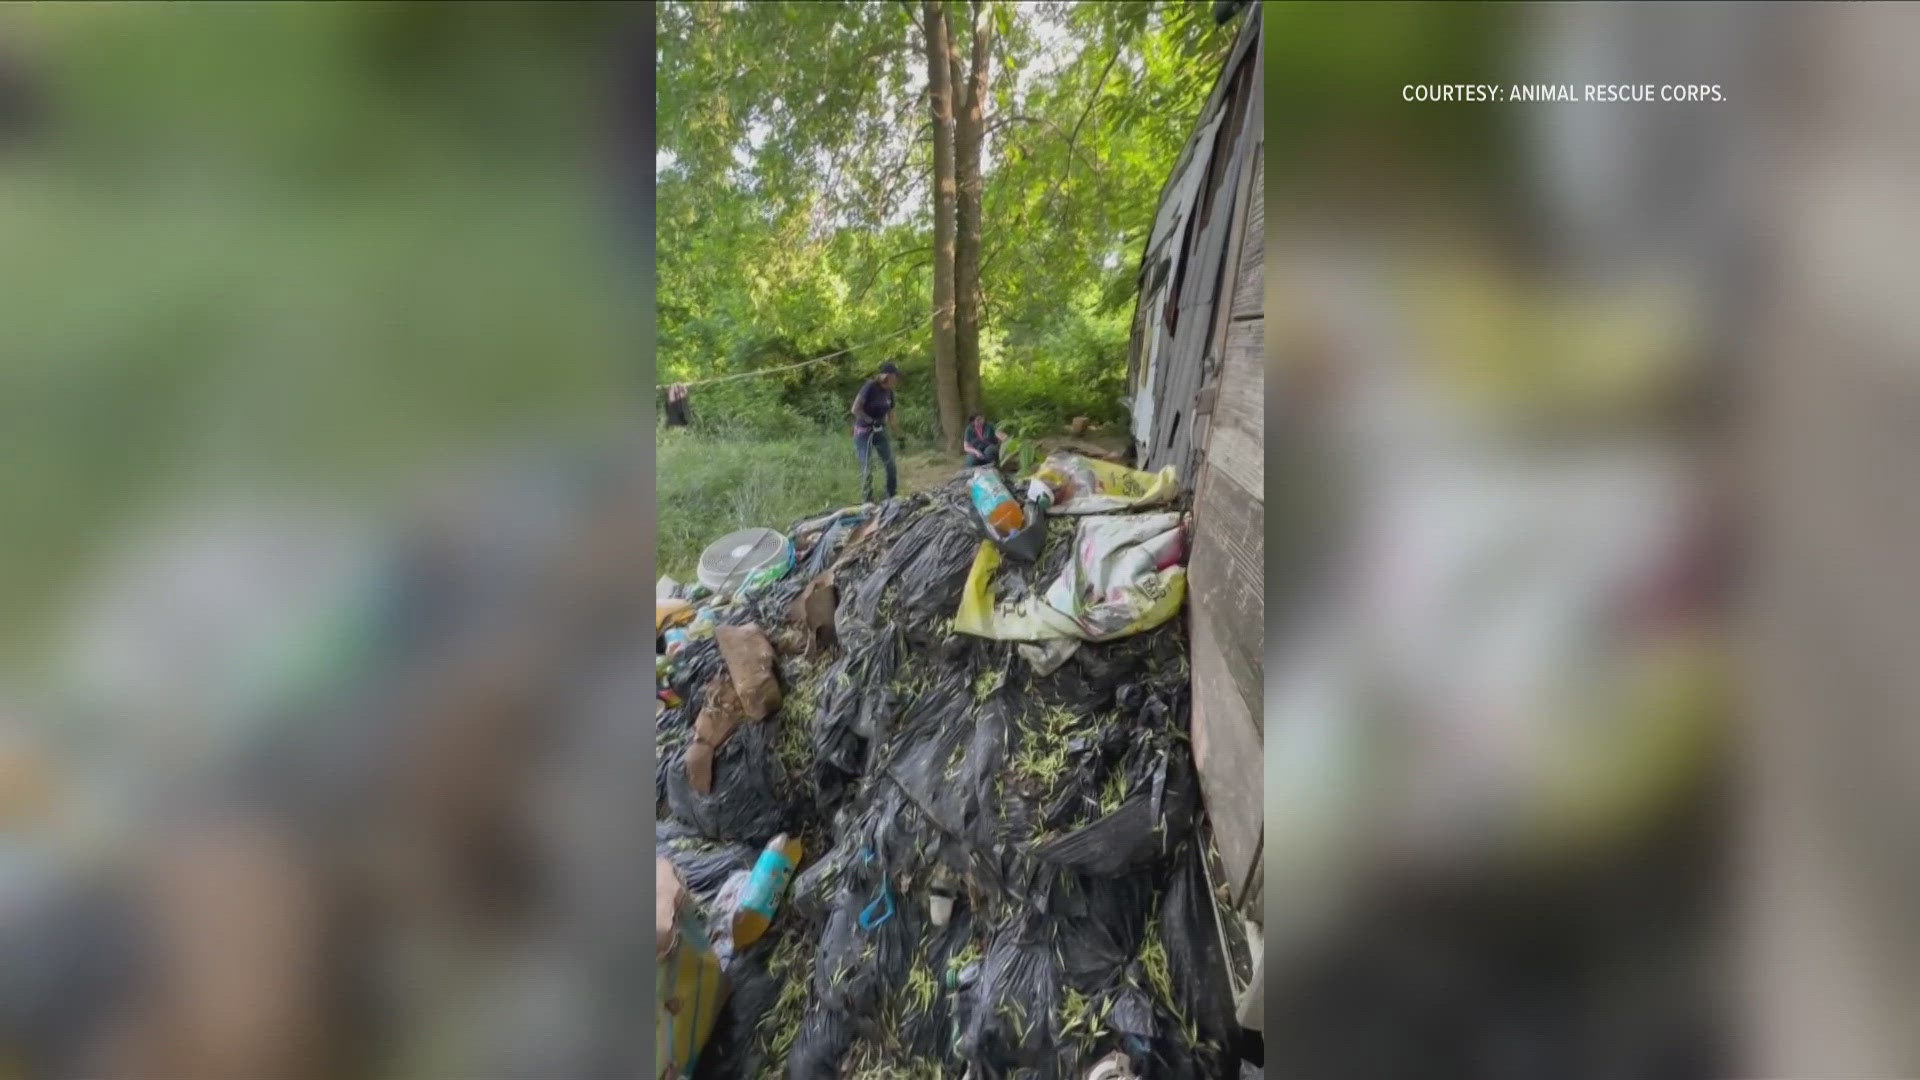 Many animals were living in deplorable conditions before ANimal Rescue Corps reportedly took them to their center.